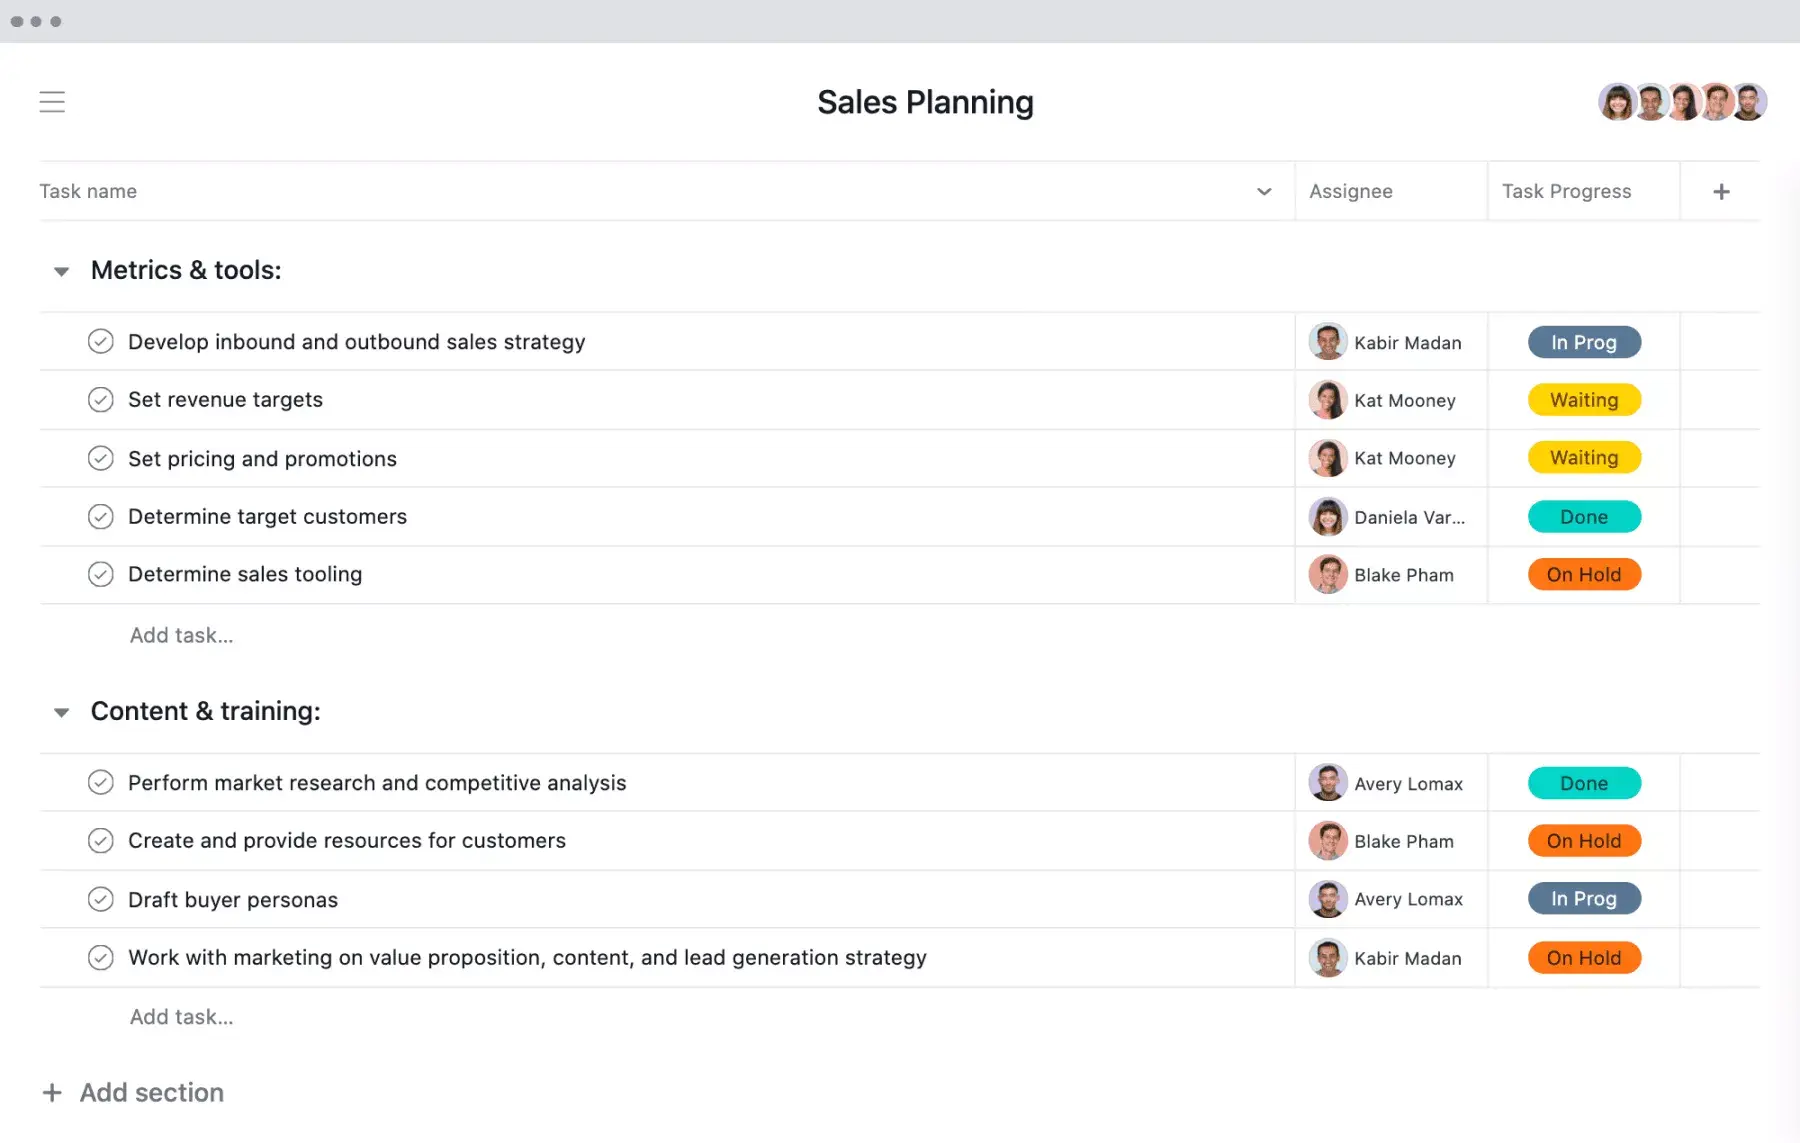 [Old Product UI] Sales planning project in Asana, spreadsheet-style view with project deliverables (Lists)